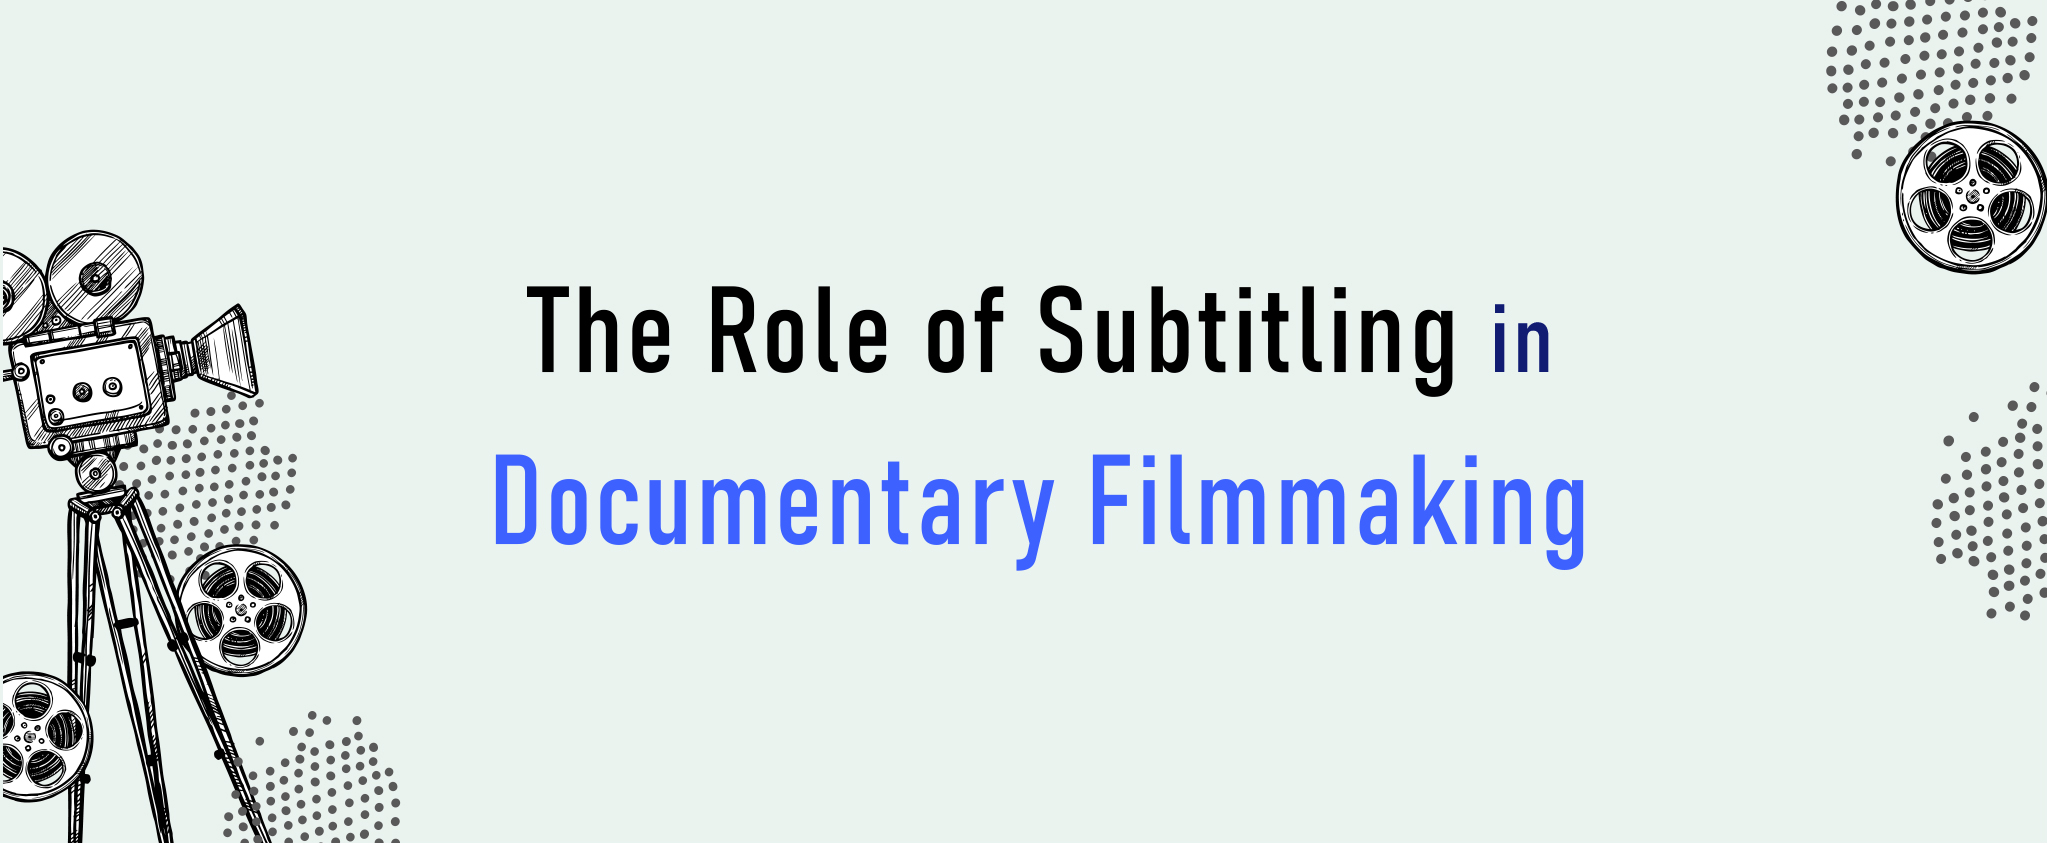 The Role of Subtitling in Documentary Filmmaking